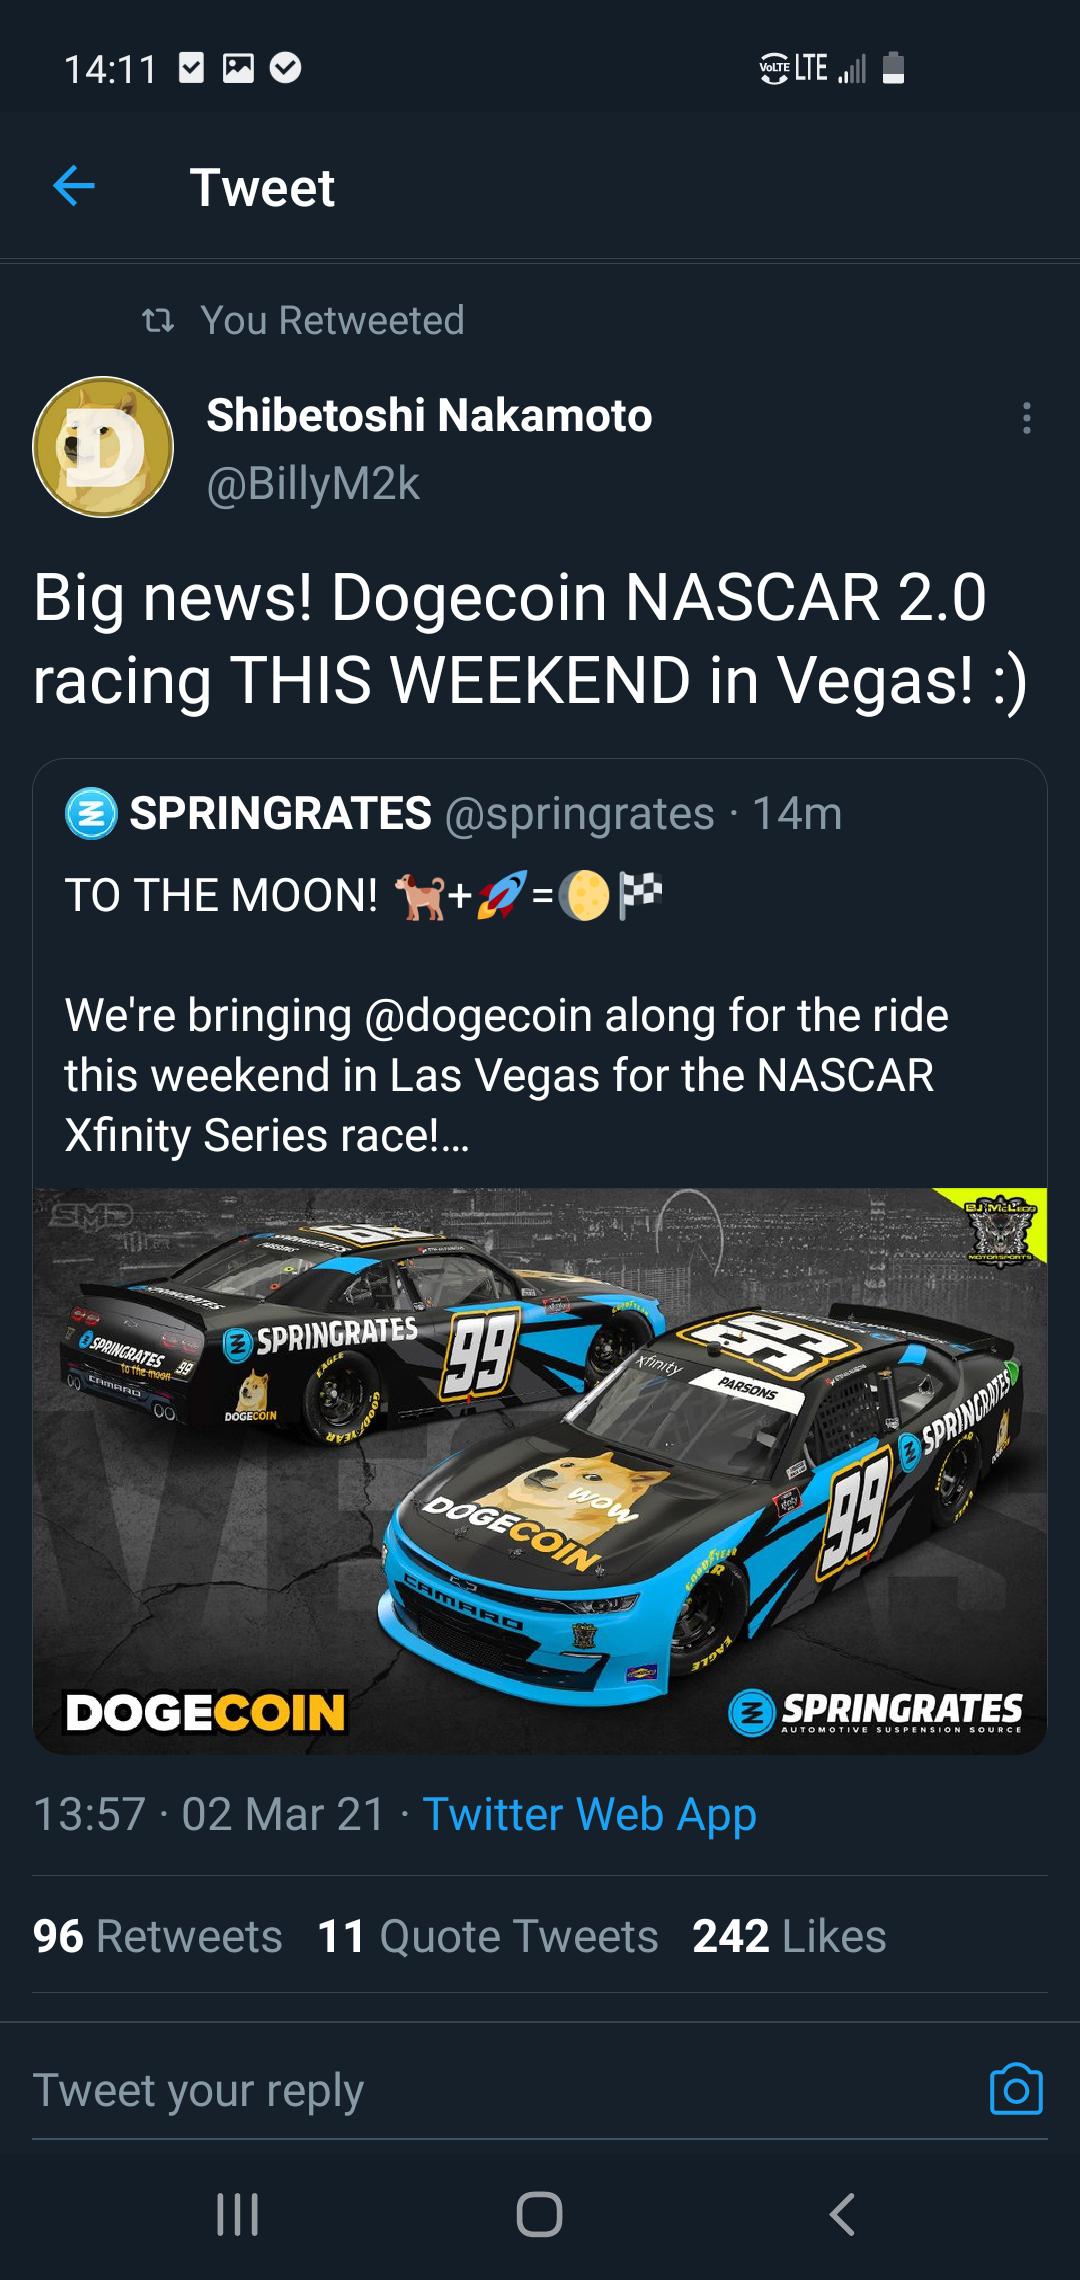 screenshot - Volte Lte il Tweet 12 You Retweeted Shibetoshi Nakamoto Big news! Dogecoin Nascar 2.0 racing This Weekend in Vegas! 3 Springrates 14m To The Moon! K Om We're bringing along for the ride this weekend in Las Vegas for the Nascar Xfinity Series 